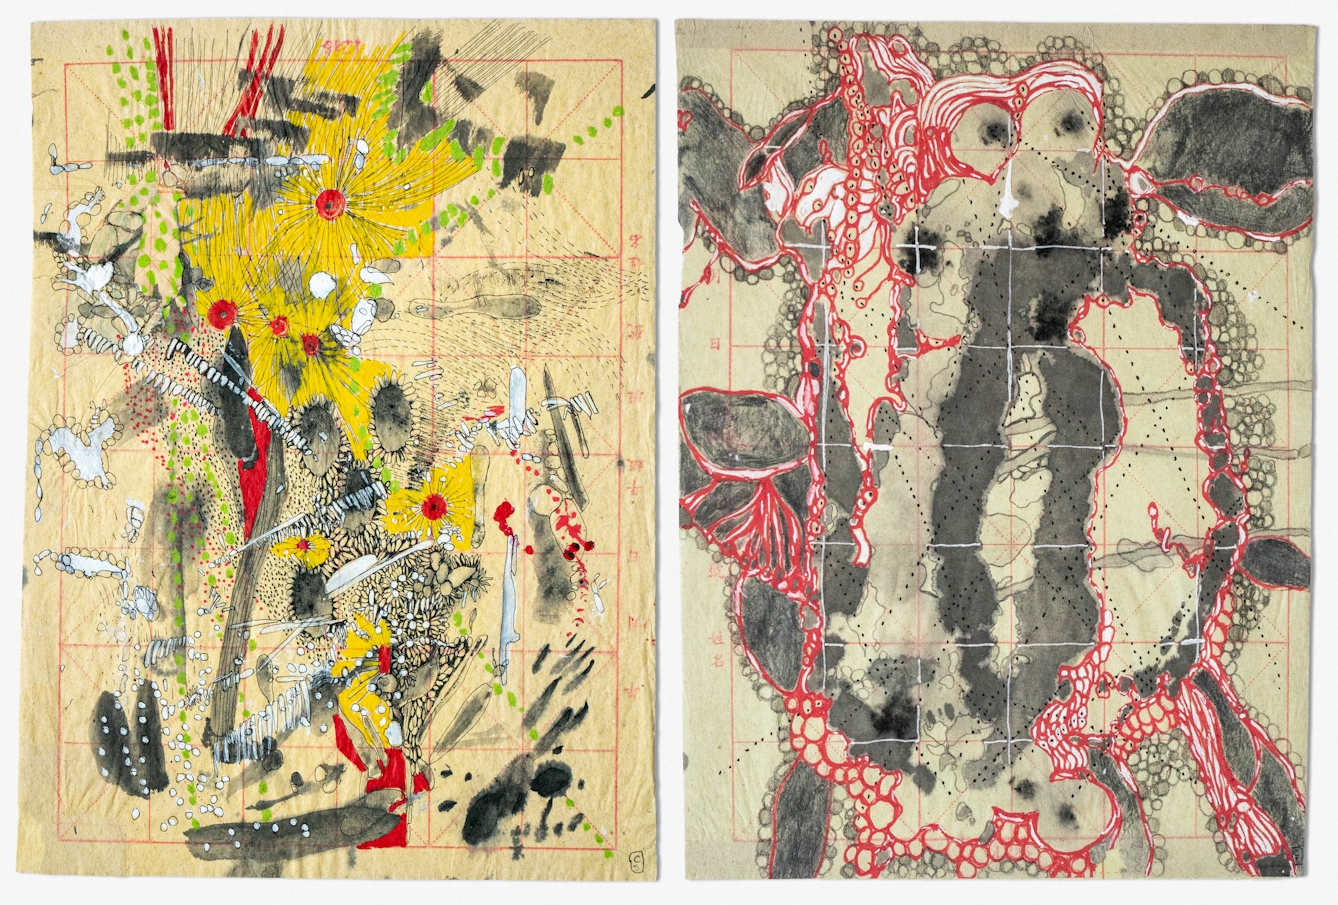 Photographic diptych of two abstract drawings on pink gridded Chinese calligraphy paper that is slightly crumpled and folded. On the left is an abstract collection of disconnected shapes of different sizes, including several red circles with a black dot in the center and faint thin grey lines extending from them, grey-black fingerprint-shaped splodges with small hollow black circles surrounding them, and white splodges in different shapes. Thick yellow ink is placed at different points within the abstract mass of shapes. There are small lines lime green dots and tiny white dots with a navy outline. On the right are a collection of faded, grey and black splodges with a sharp bright red and white ink outline connecting the isolated splodges into an abstract structure. Surrounding the larger grey splodges' red and white outline are smaller circles either filled in grey or left hollow. Much of the red grid of the paper has been drawn over with think white lines. 